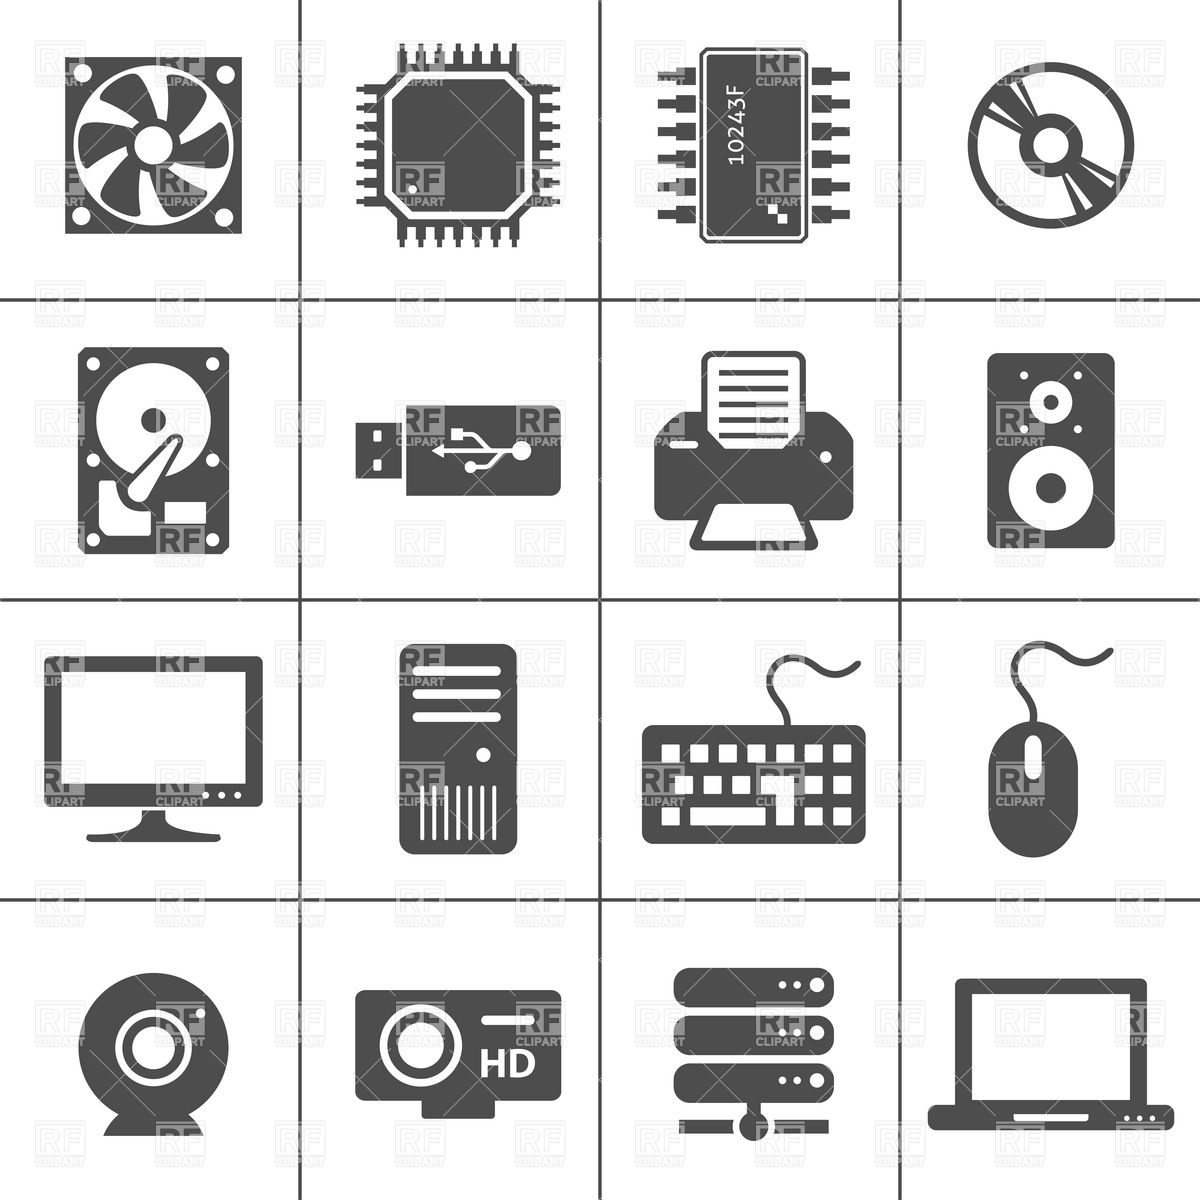 hardware clipart - Clip Art Library